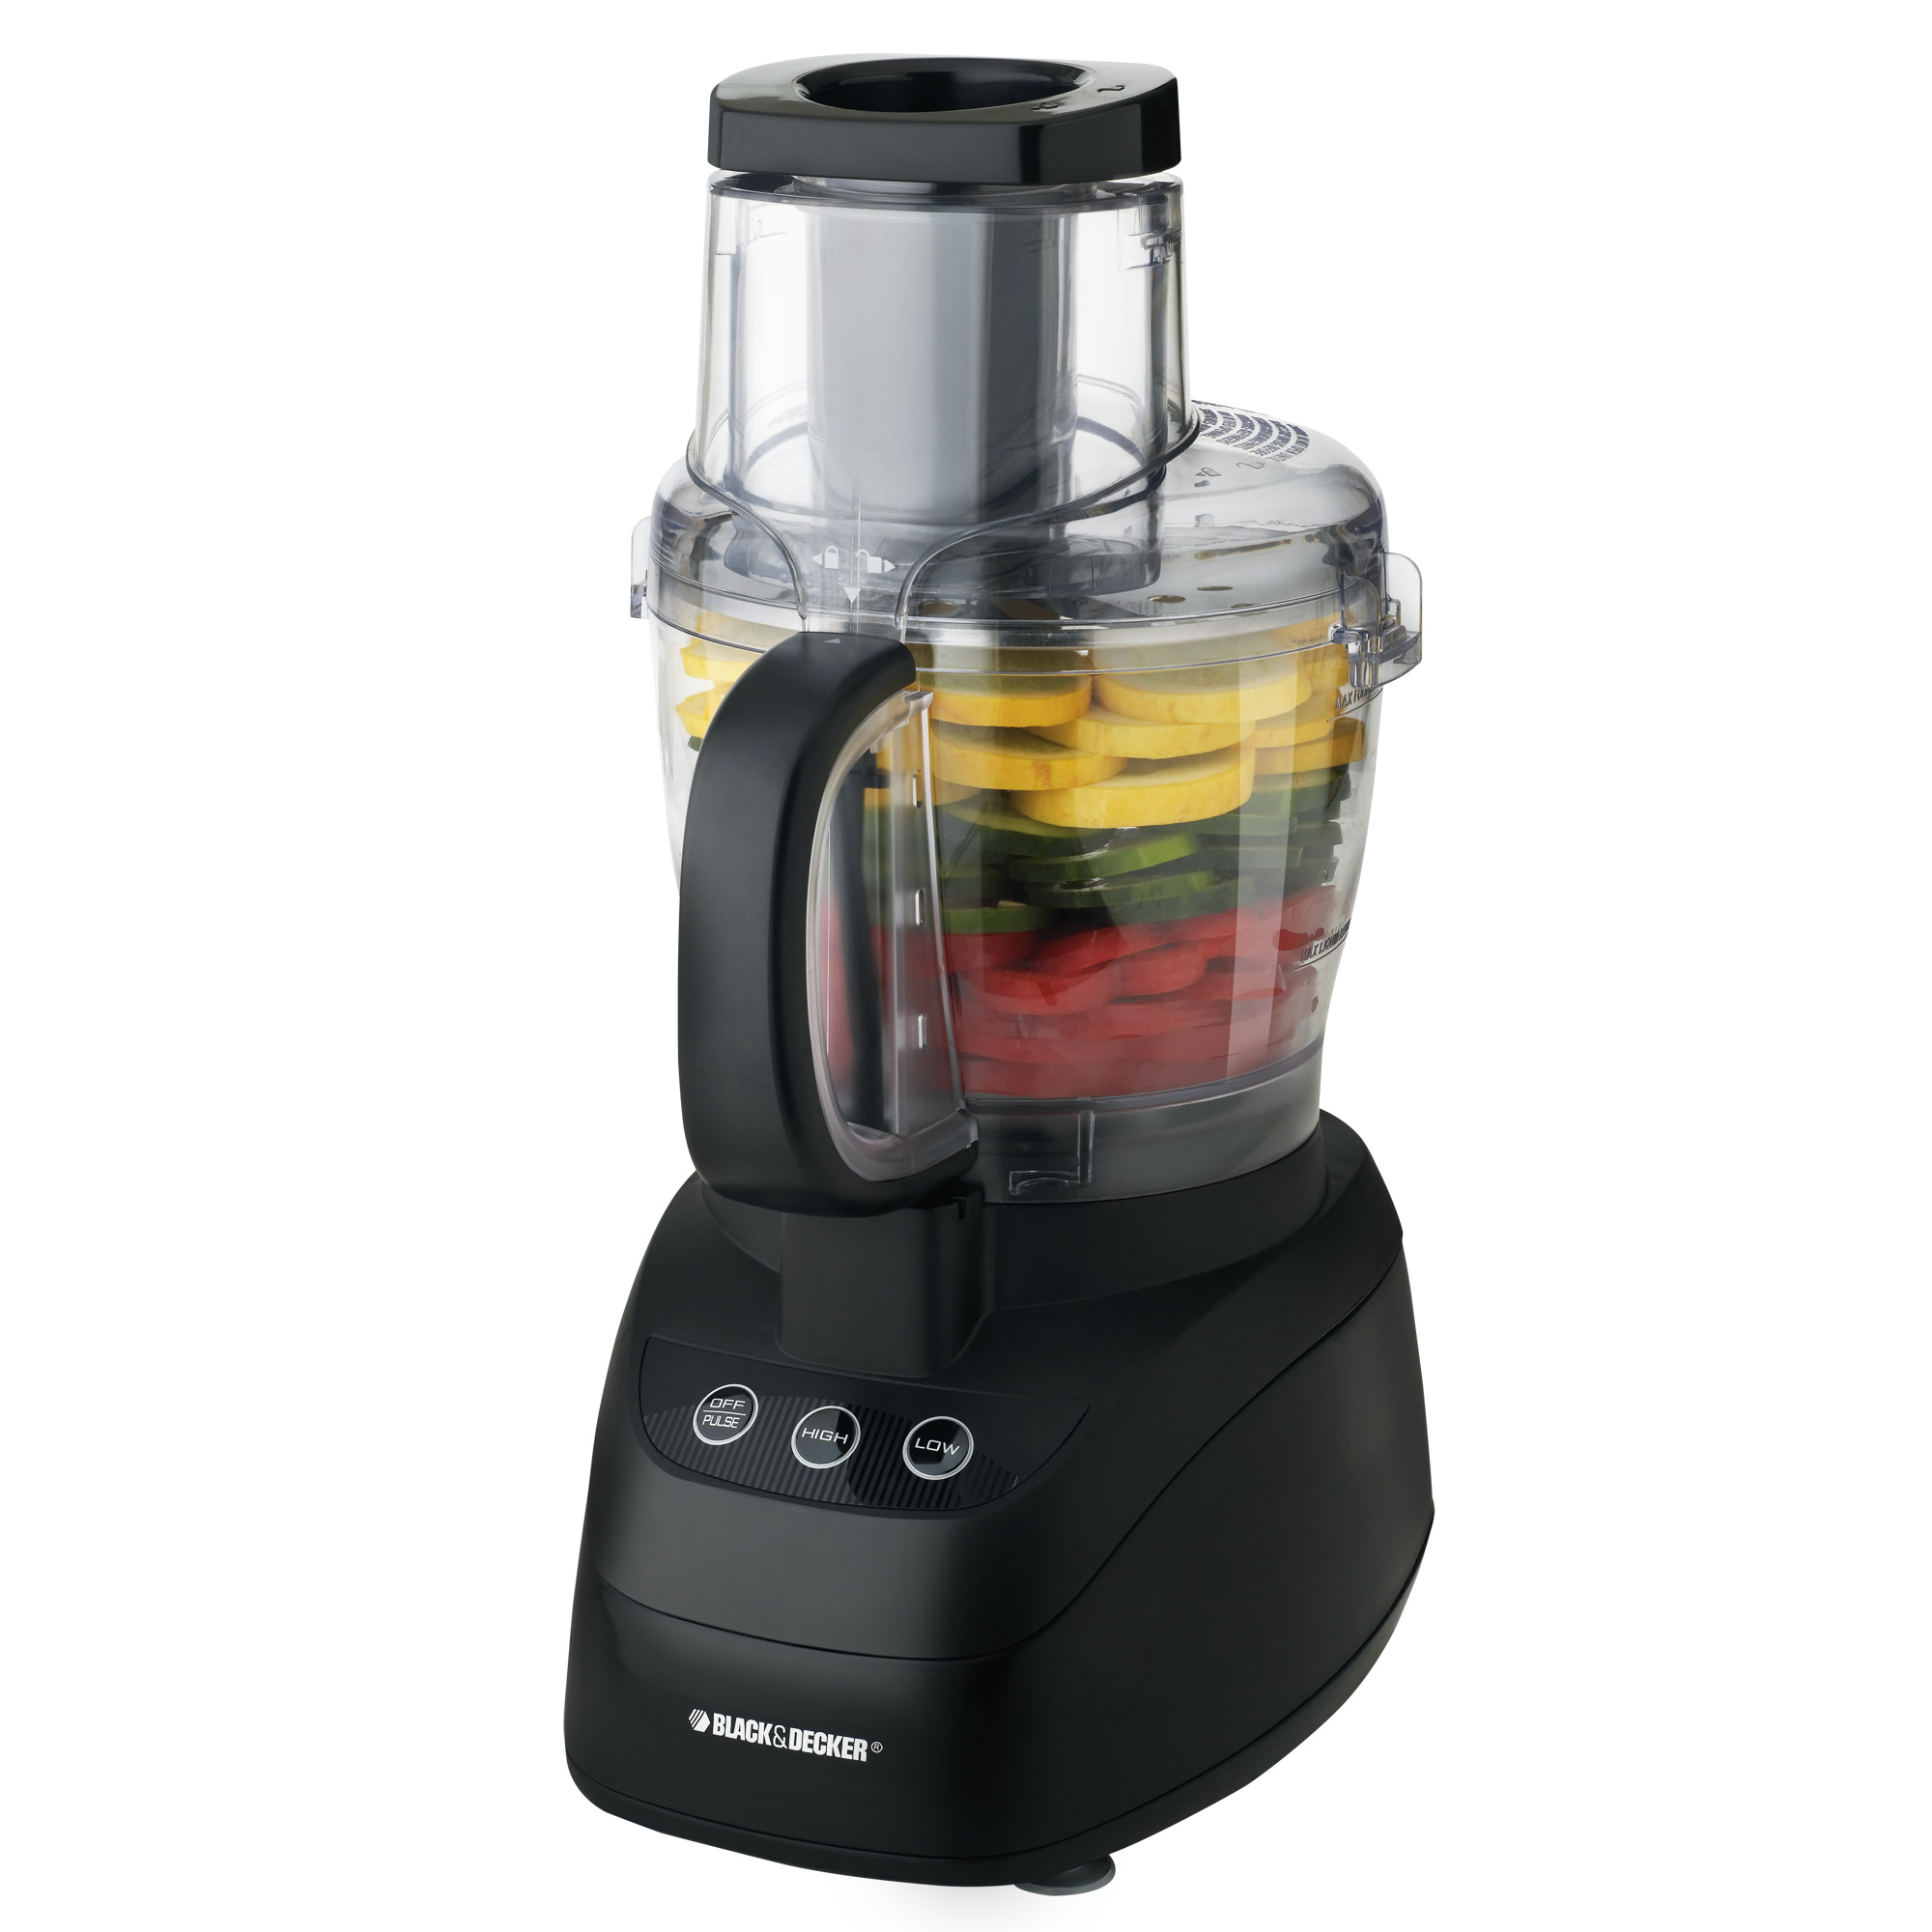 BLACK+DECKER Power Pro 10-Cup Wide-Mouth Food Processor, Black, FP2500B - image 1 of 7